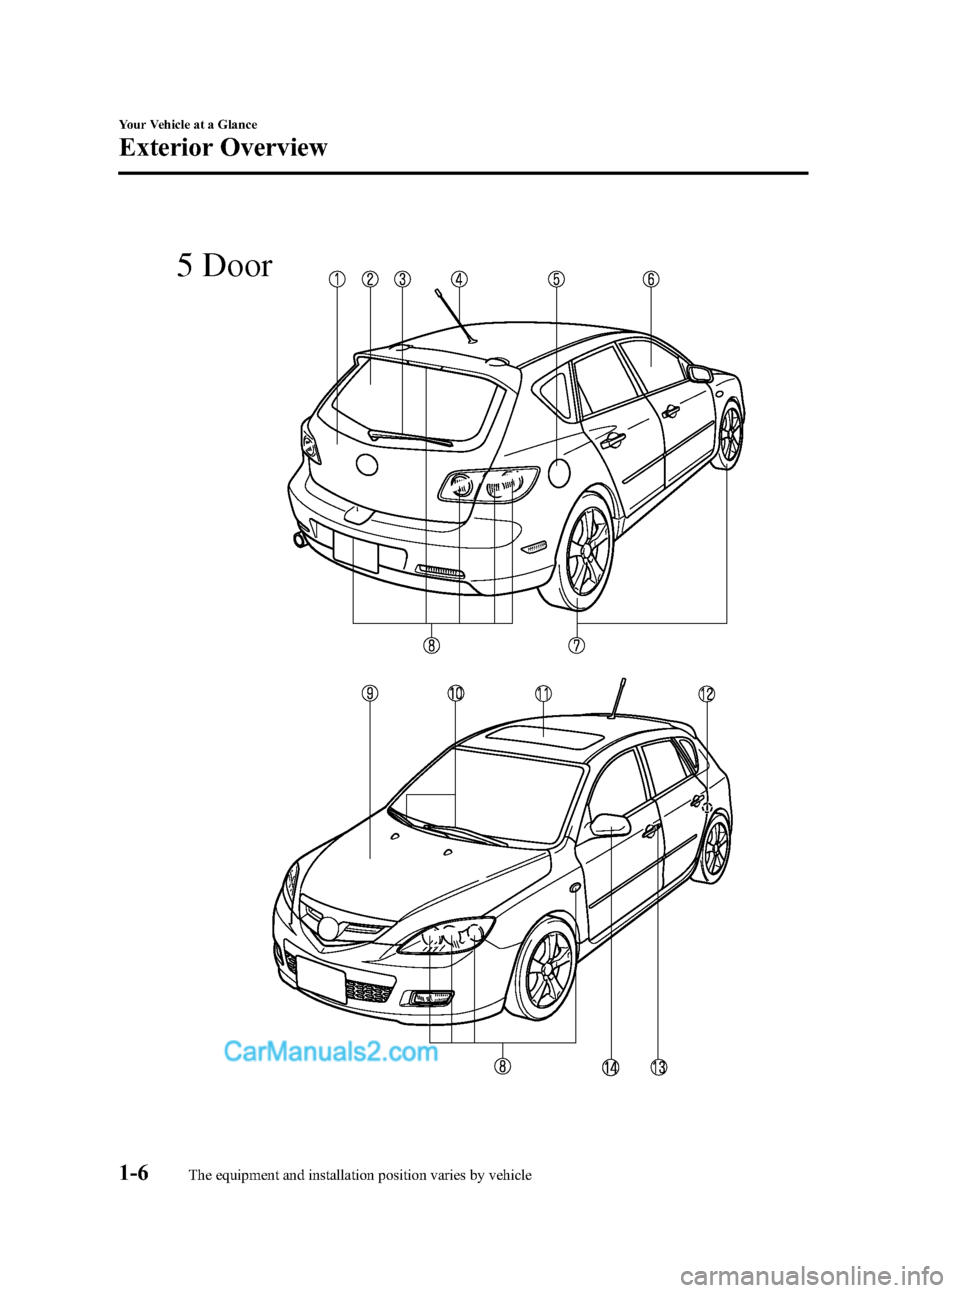 MAZDA MODEL MAZDASPEED 3 2008   (in English) User Guide Black plate (12,1)
5 Door
1-6
Your Vehicle at a Glance
The equipment and installation position varies by vehicle
Exterior Overview
Mazda3_8X41-EA-07F_Edition1 Page12
Wednesday, April 25 2007 1:4 PM
Fo